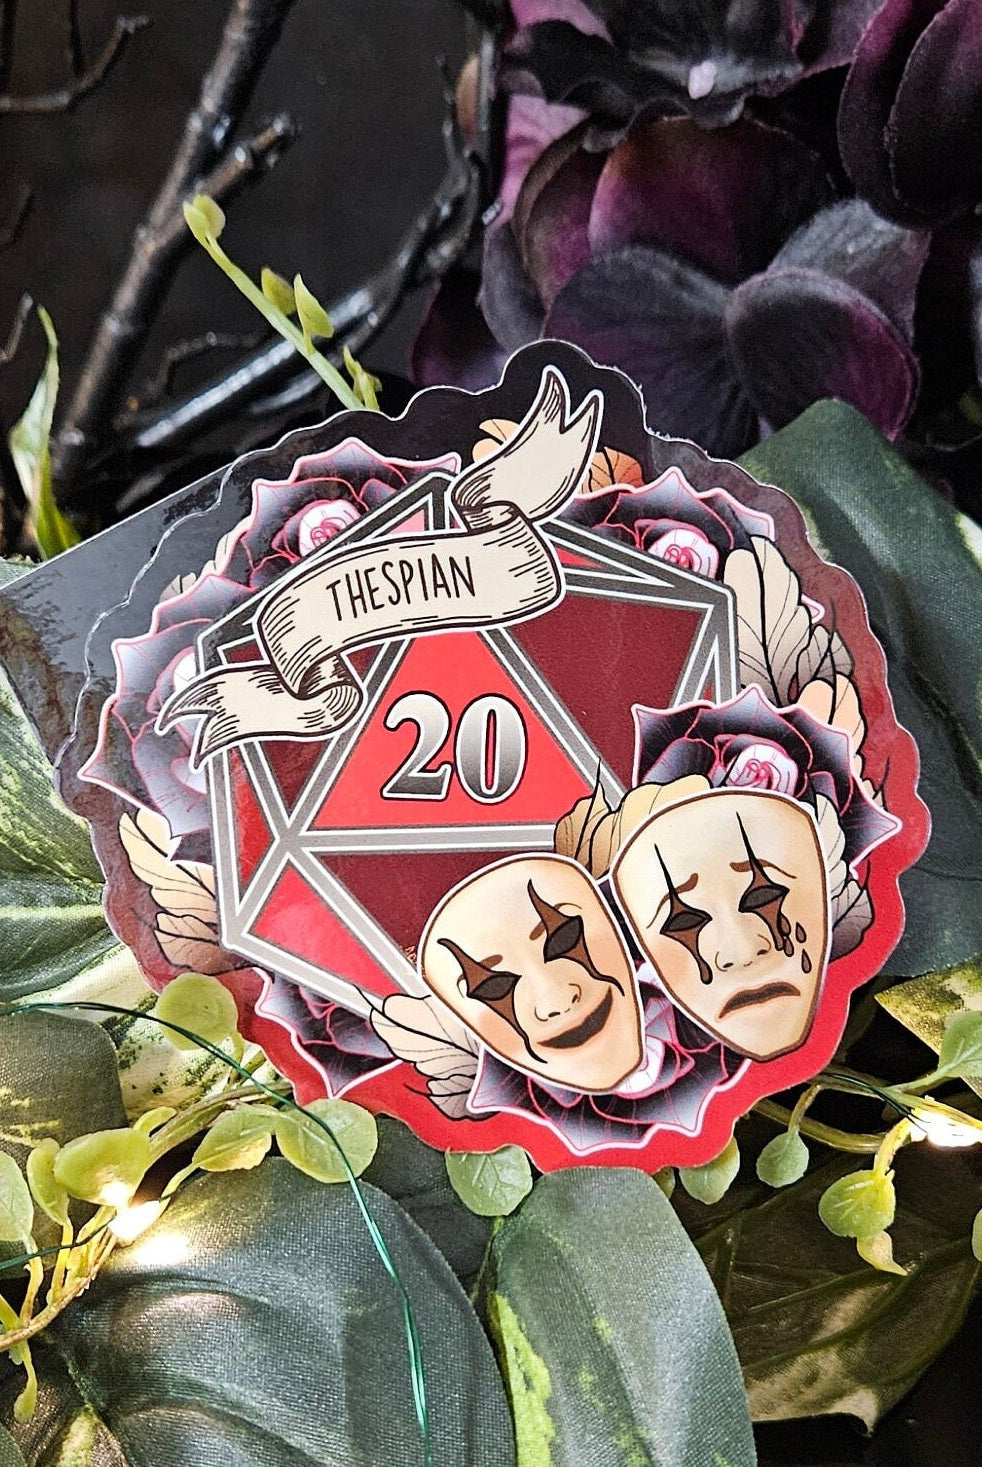 GLOSSY STICKER: D20 The Thespian , Floral D20 Sticker , Floral D20 Stickers, D20 Sticker , D20 Thespian Sticker , Player Type D20